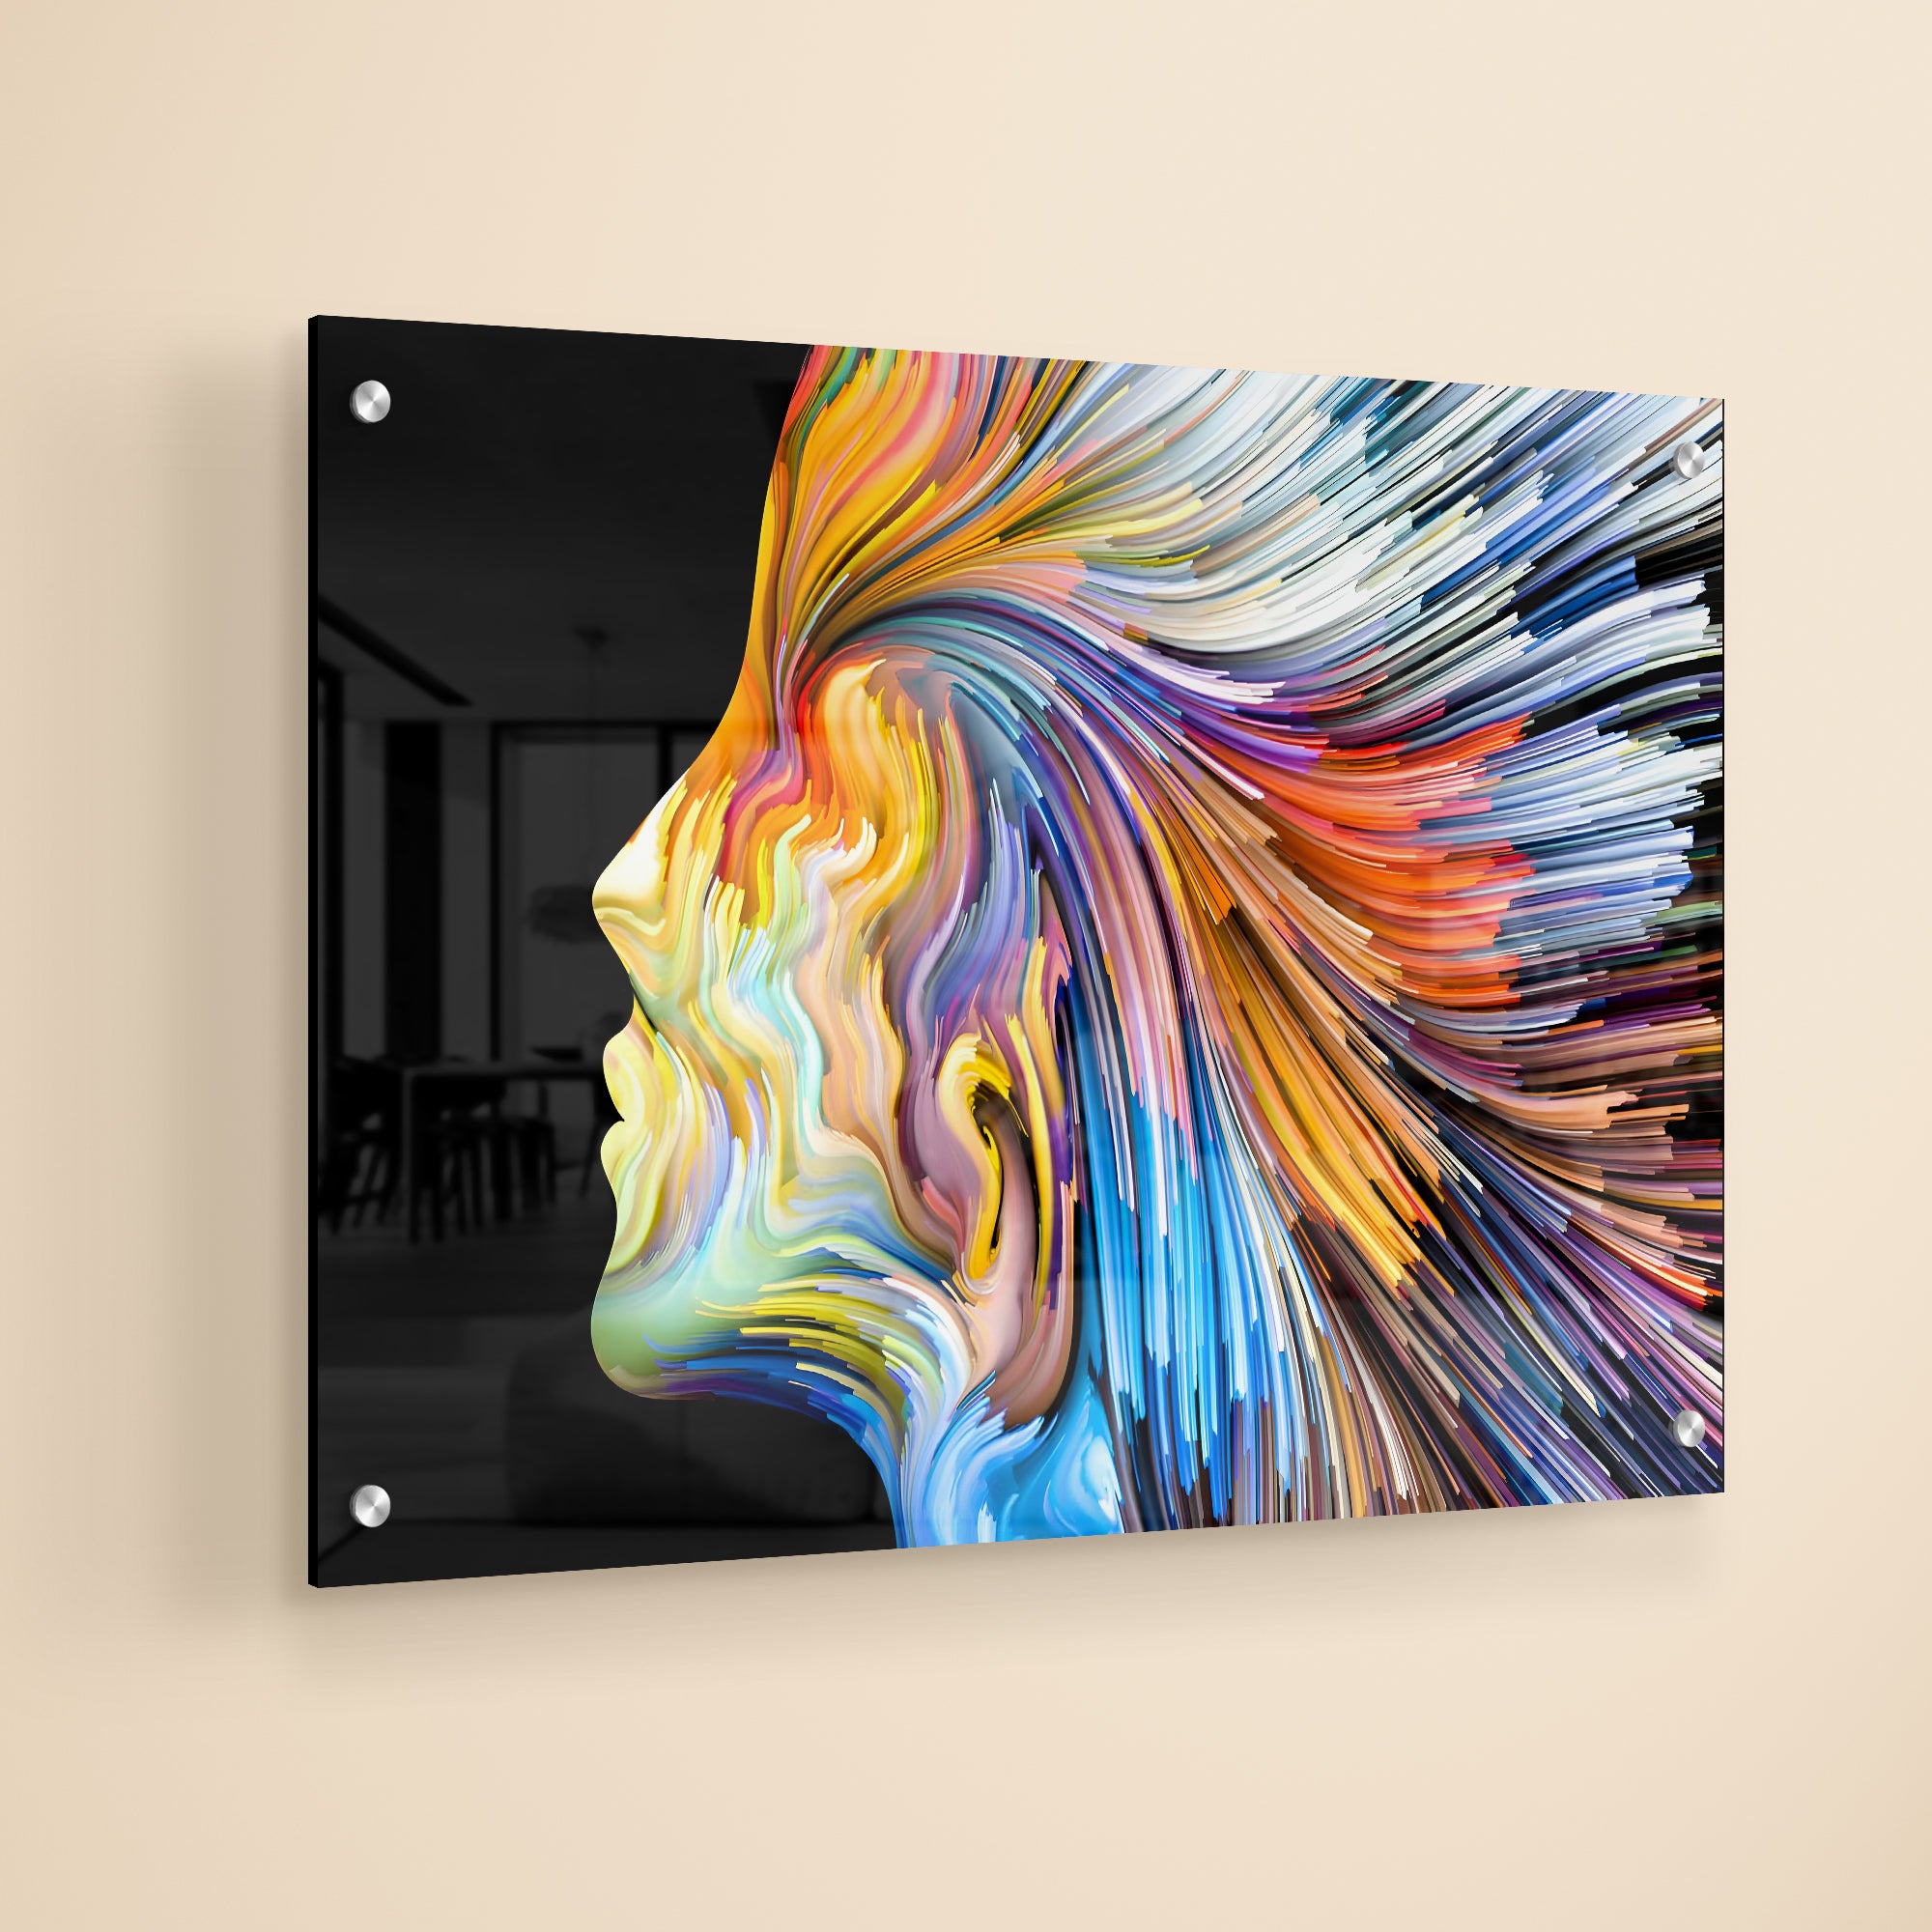 Colors of Imagination and Graphic Design Abstract Morden Art  Acrylic Painting